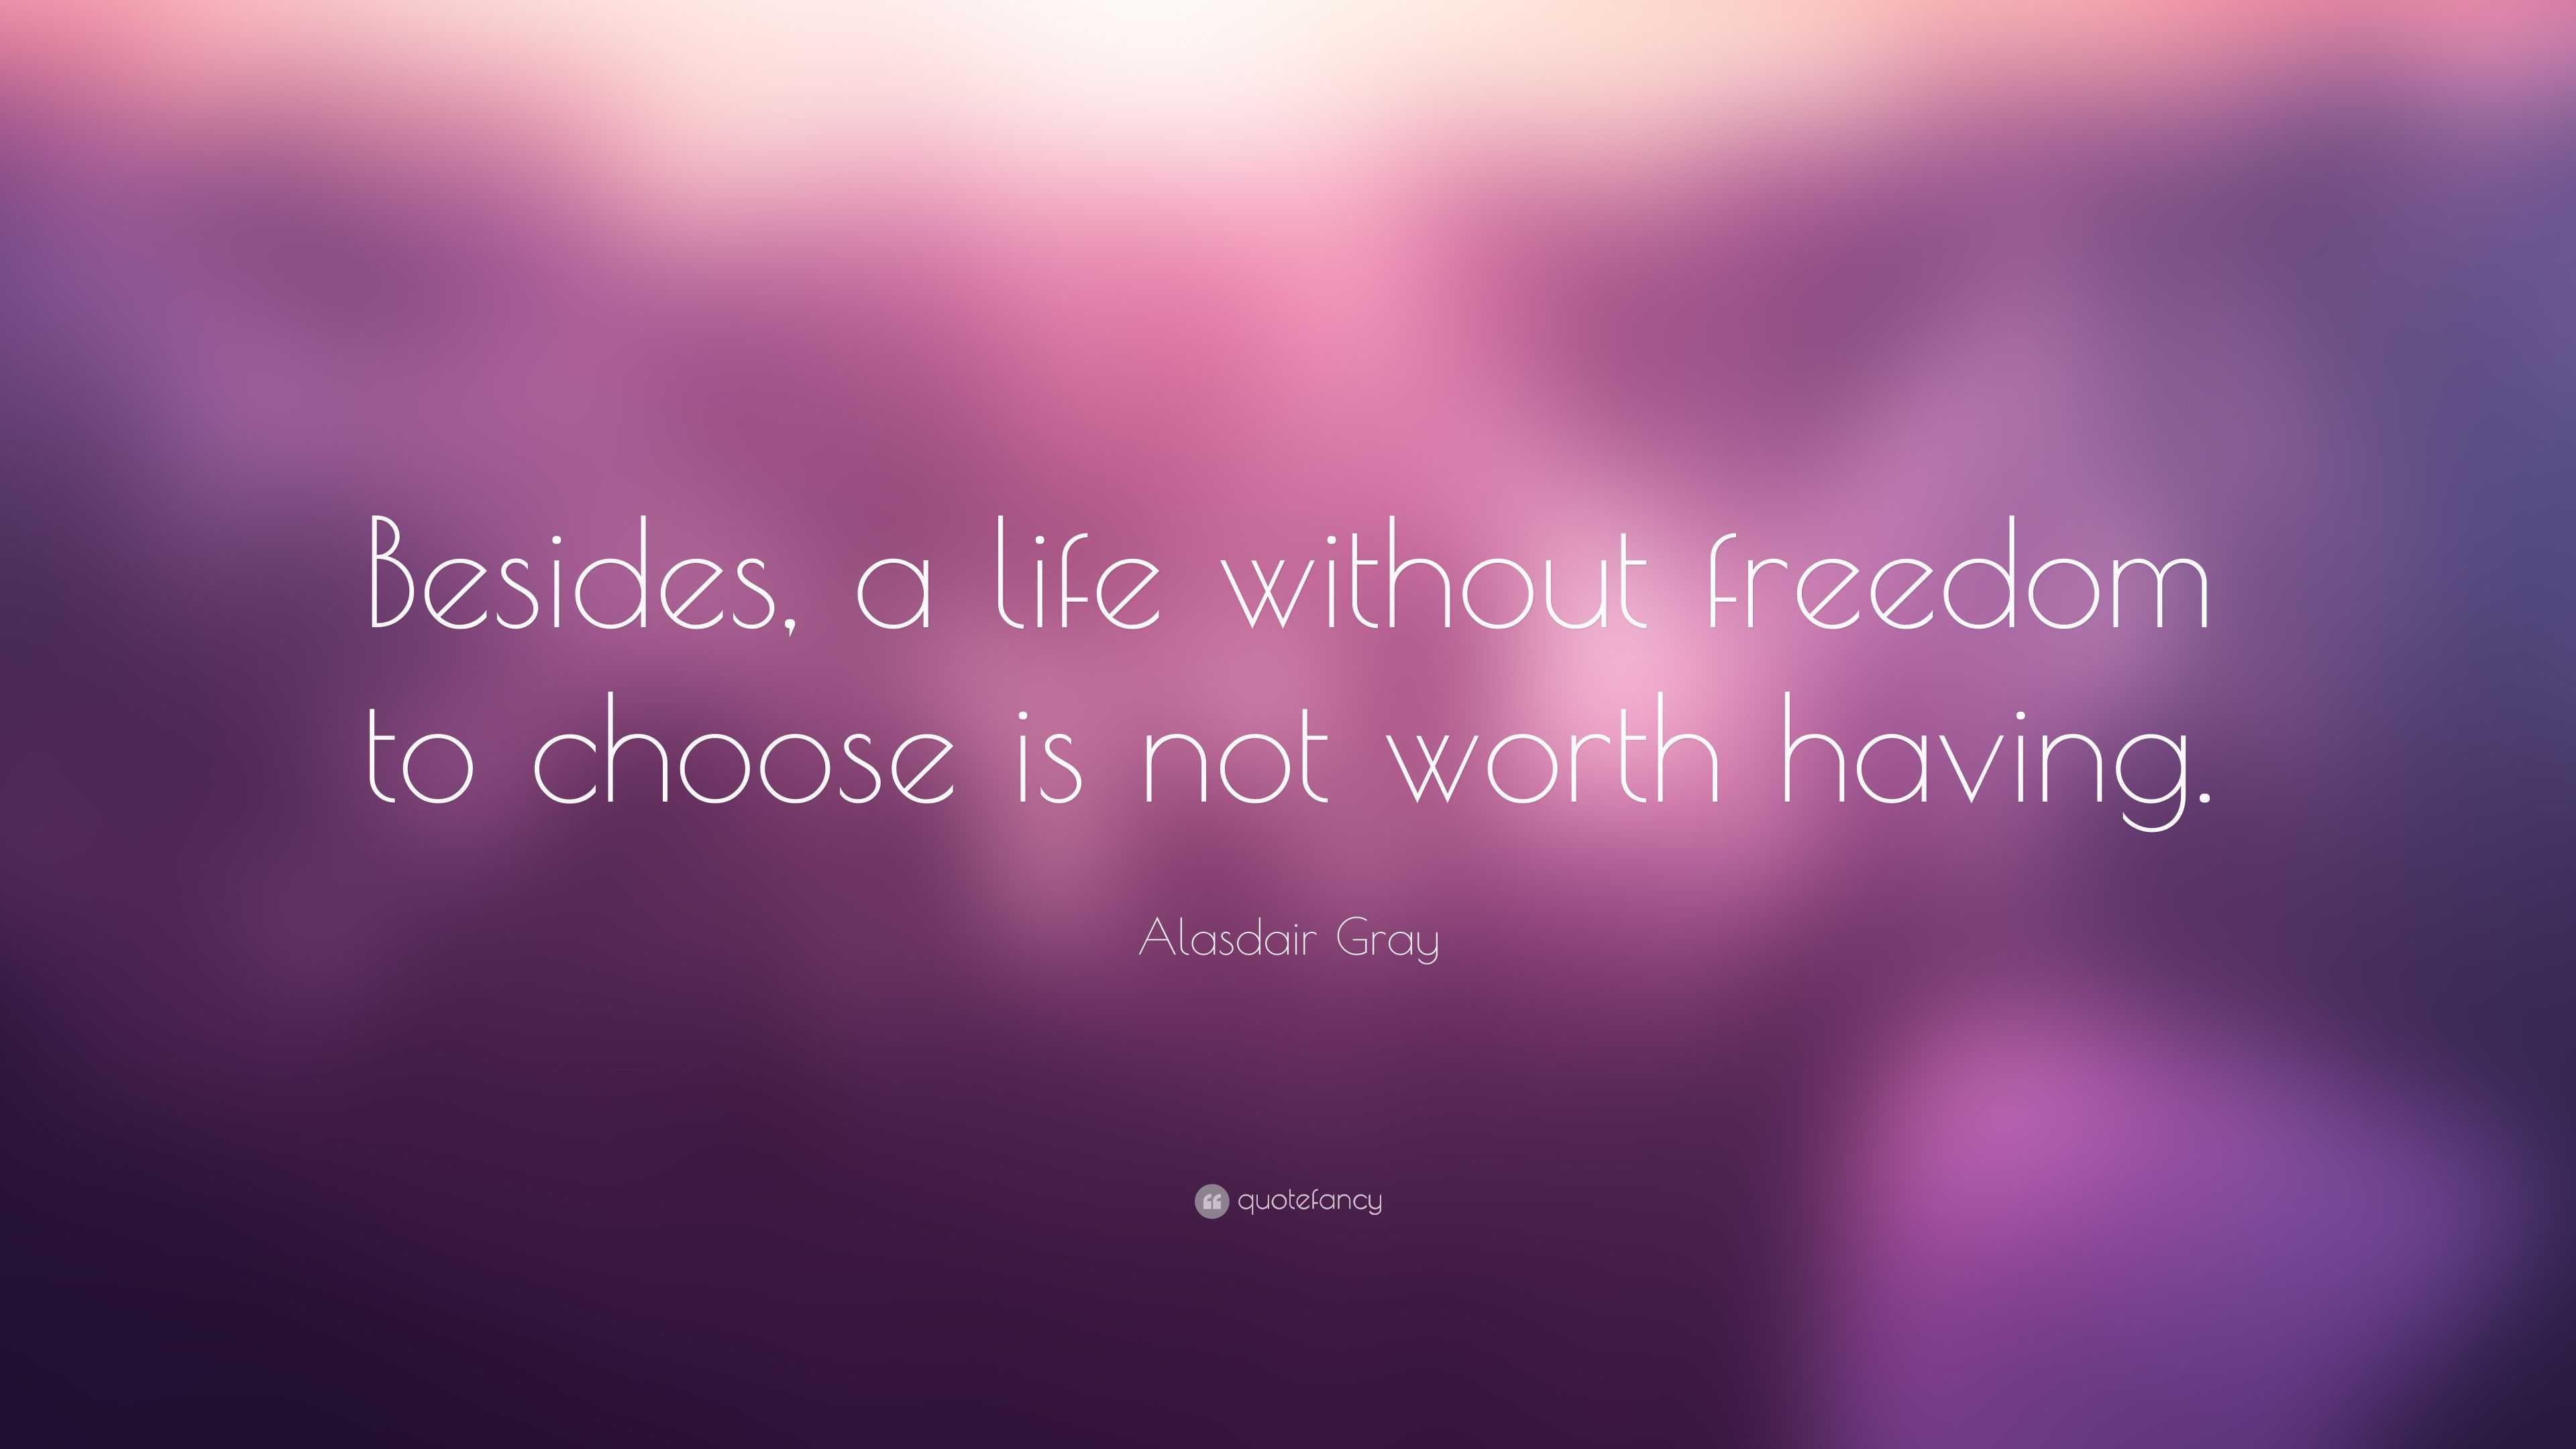 Alasdair Gray Quote “Besides a life without freedom to choose is not worth